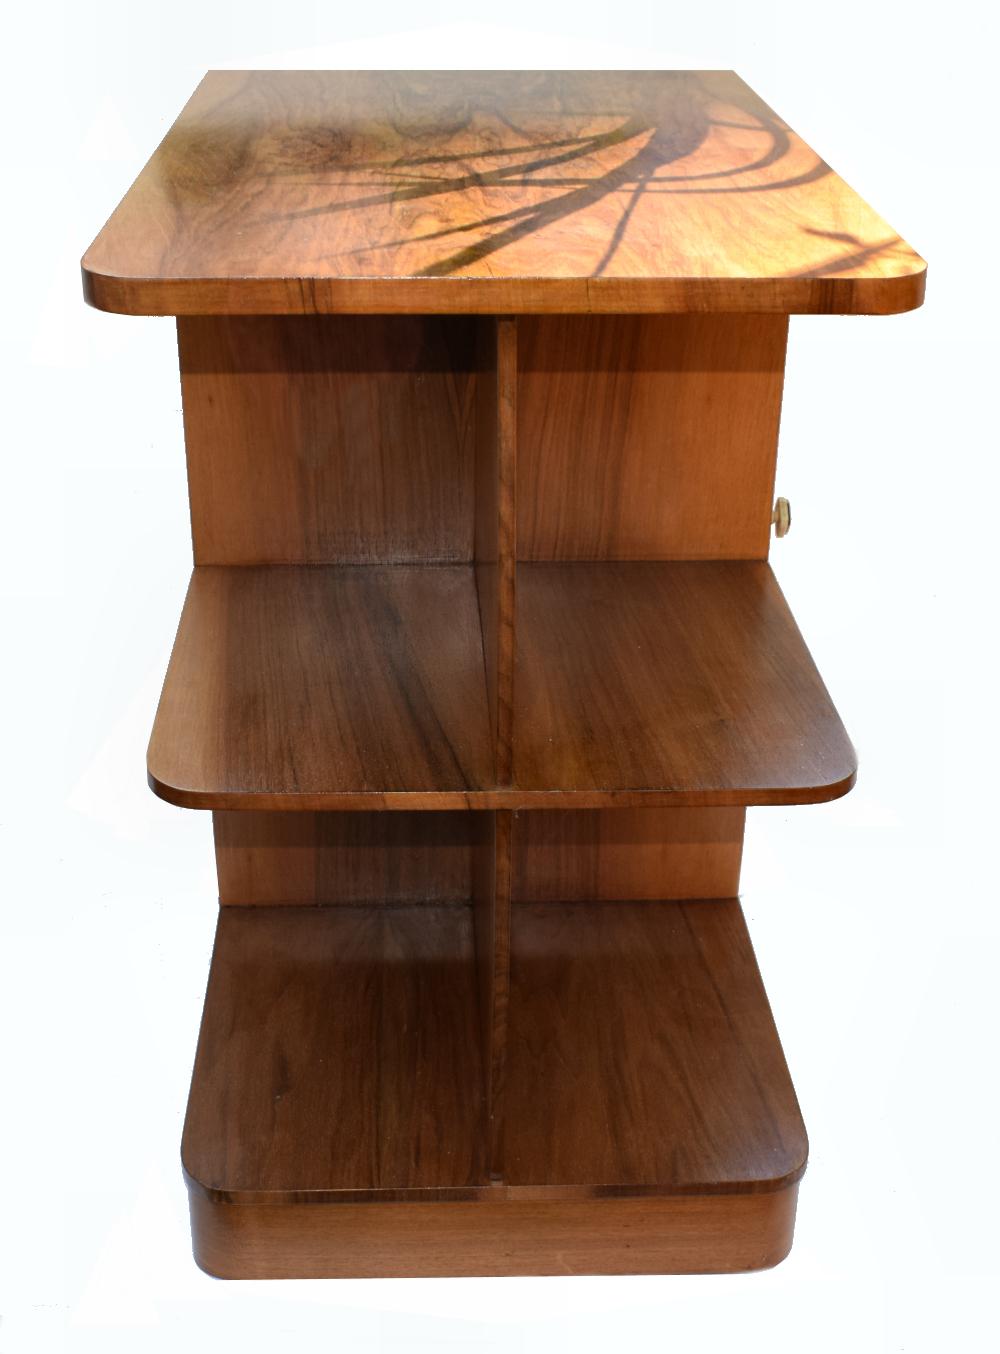 Stunning 1930s figured walnut 1930s Art Deco coffee/ book table. This is a really stylish period piece in fabulous condition with great figured walnut all-over, still retains it's original Bakelite handle. Ideal size for displaying and storage with